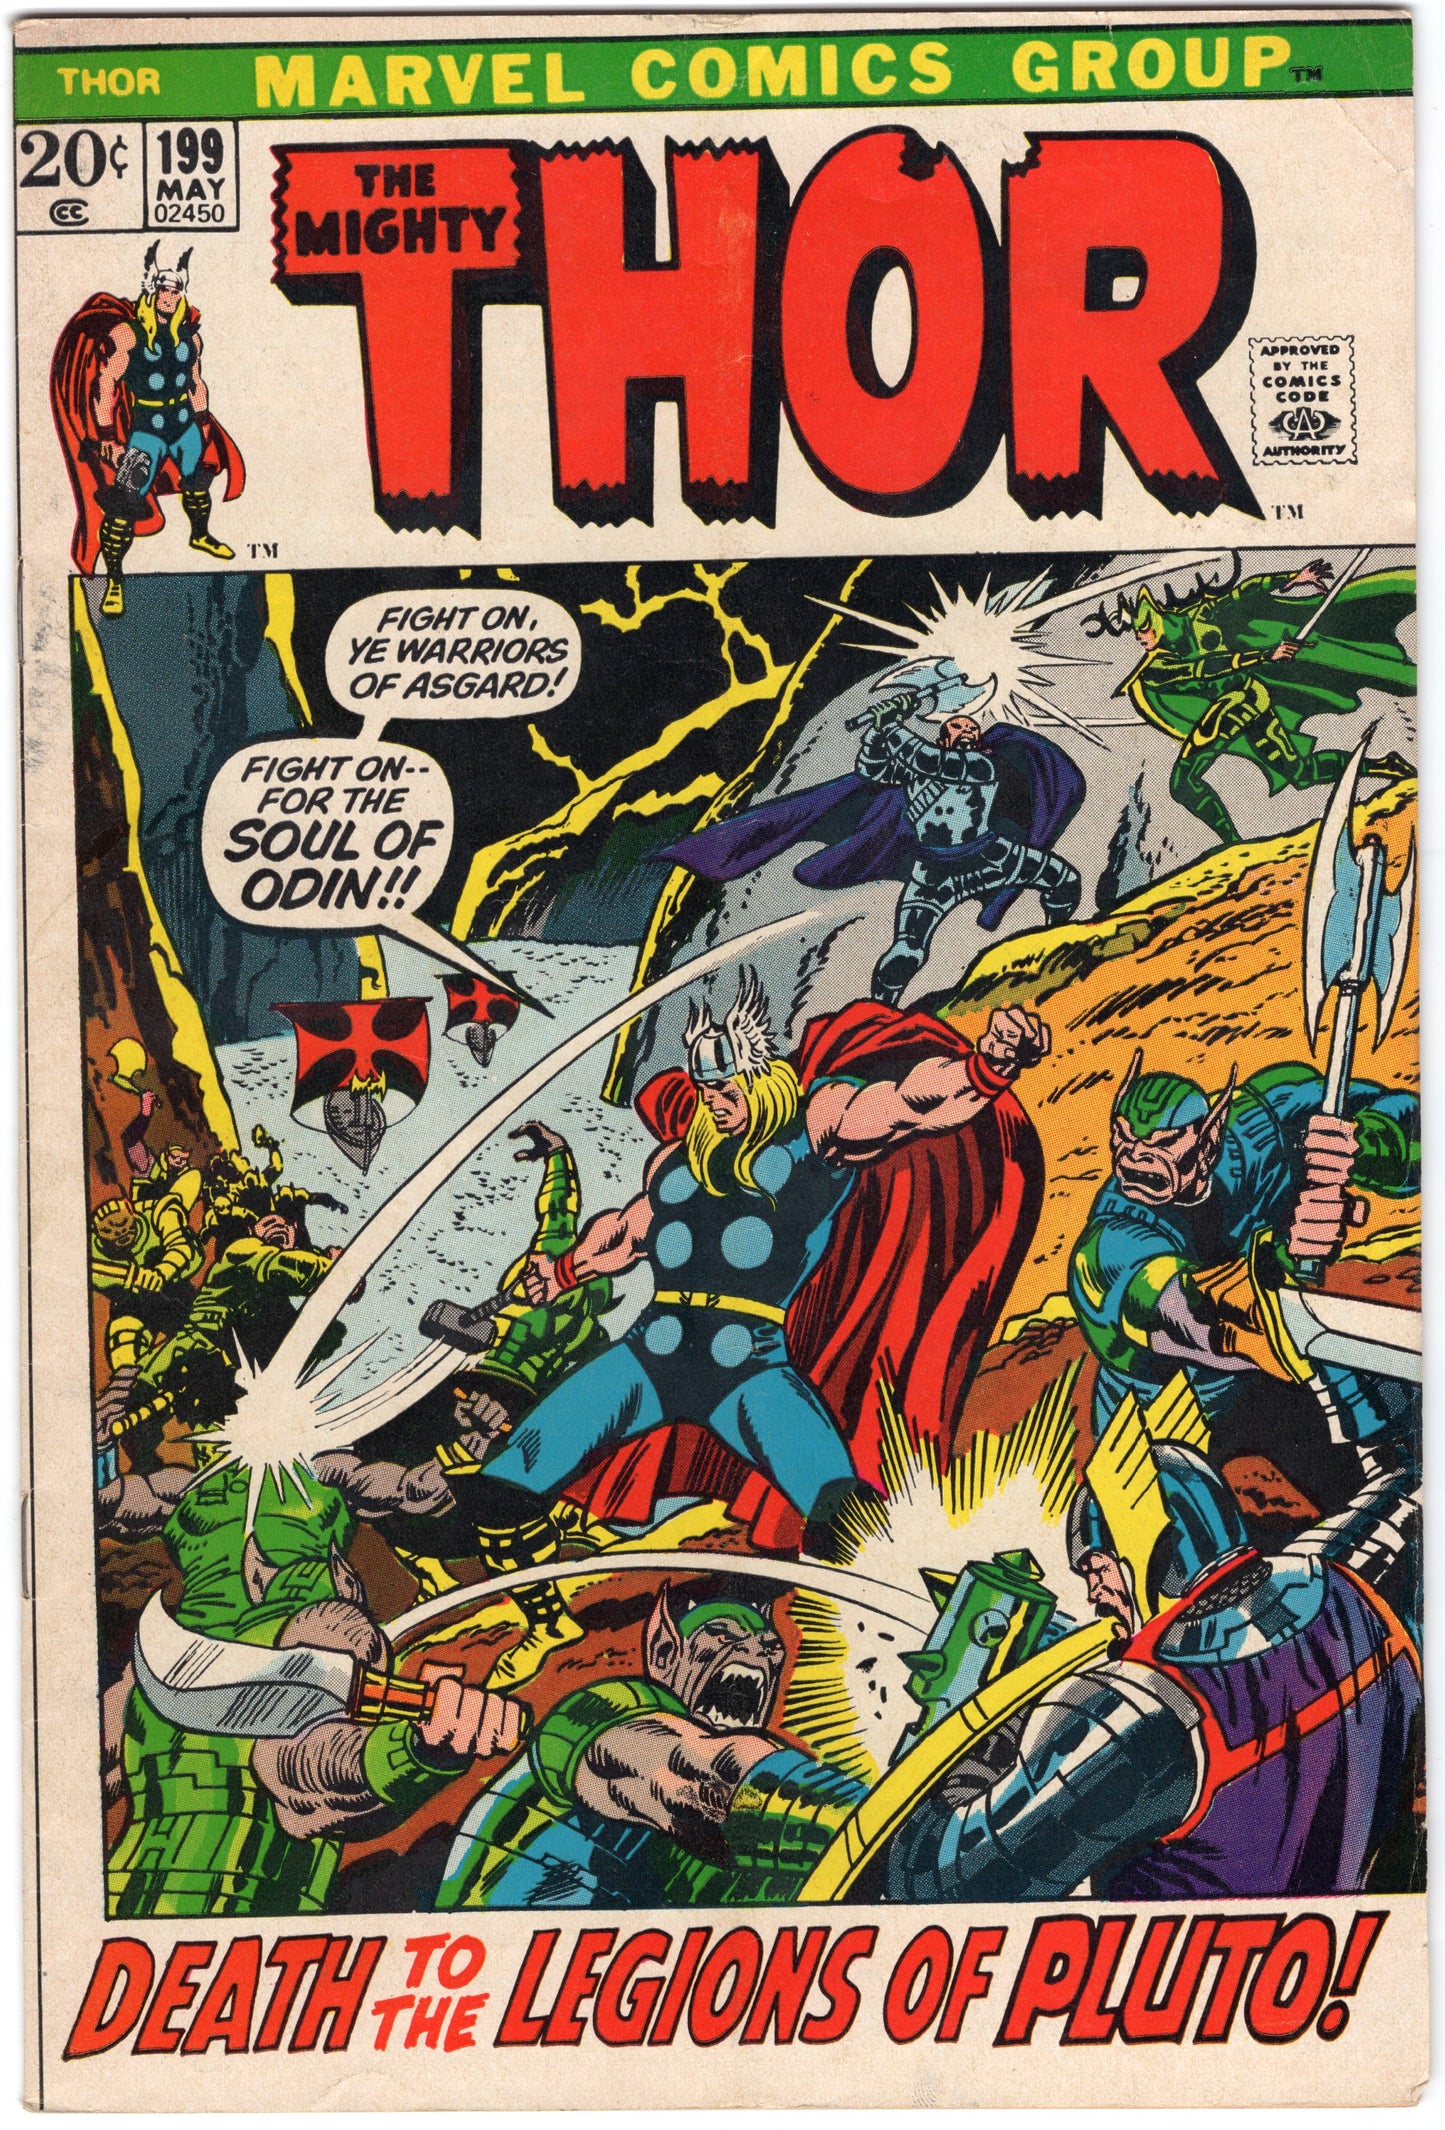 Thor - Issue #199 "Death to the Leigions of Pluto!" (May, 1972 - Marvel Comics) FN-